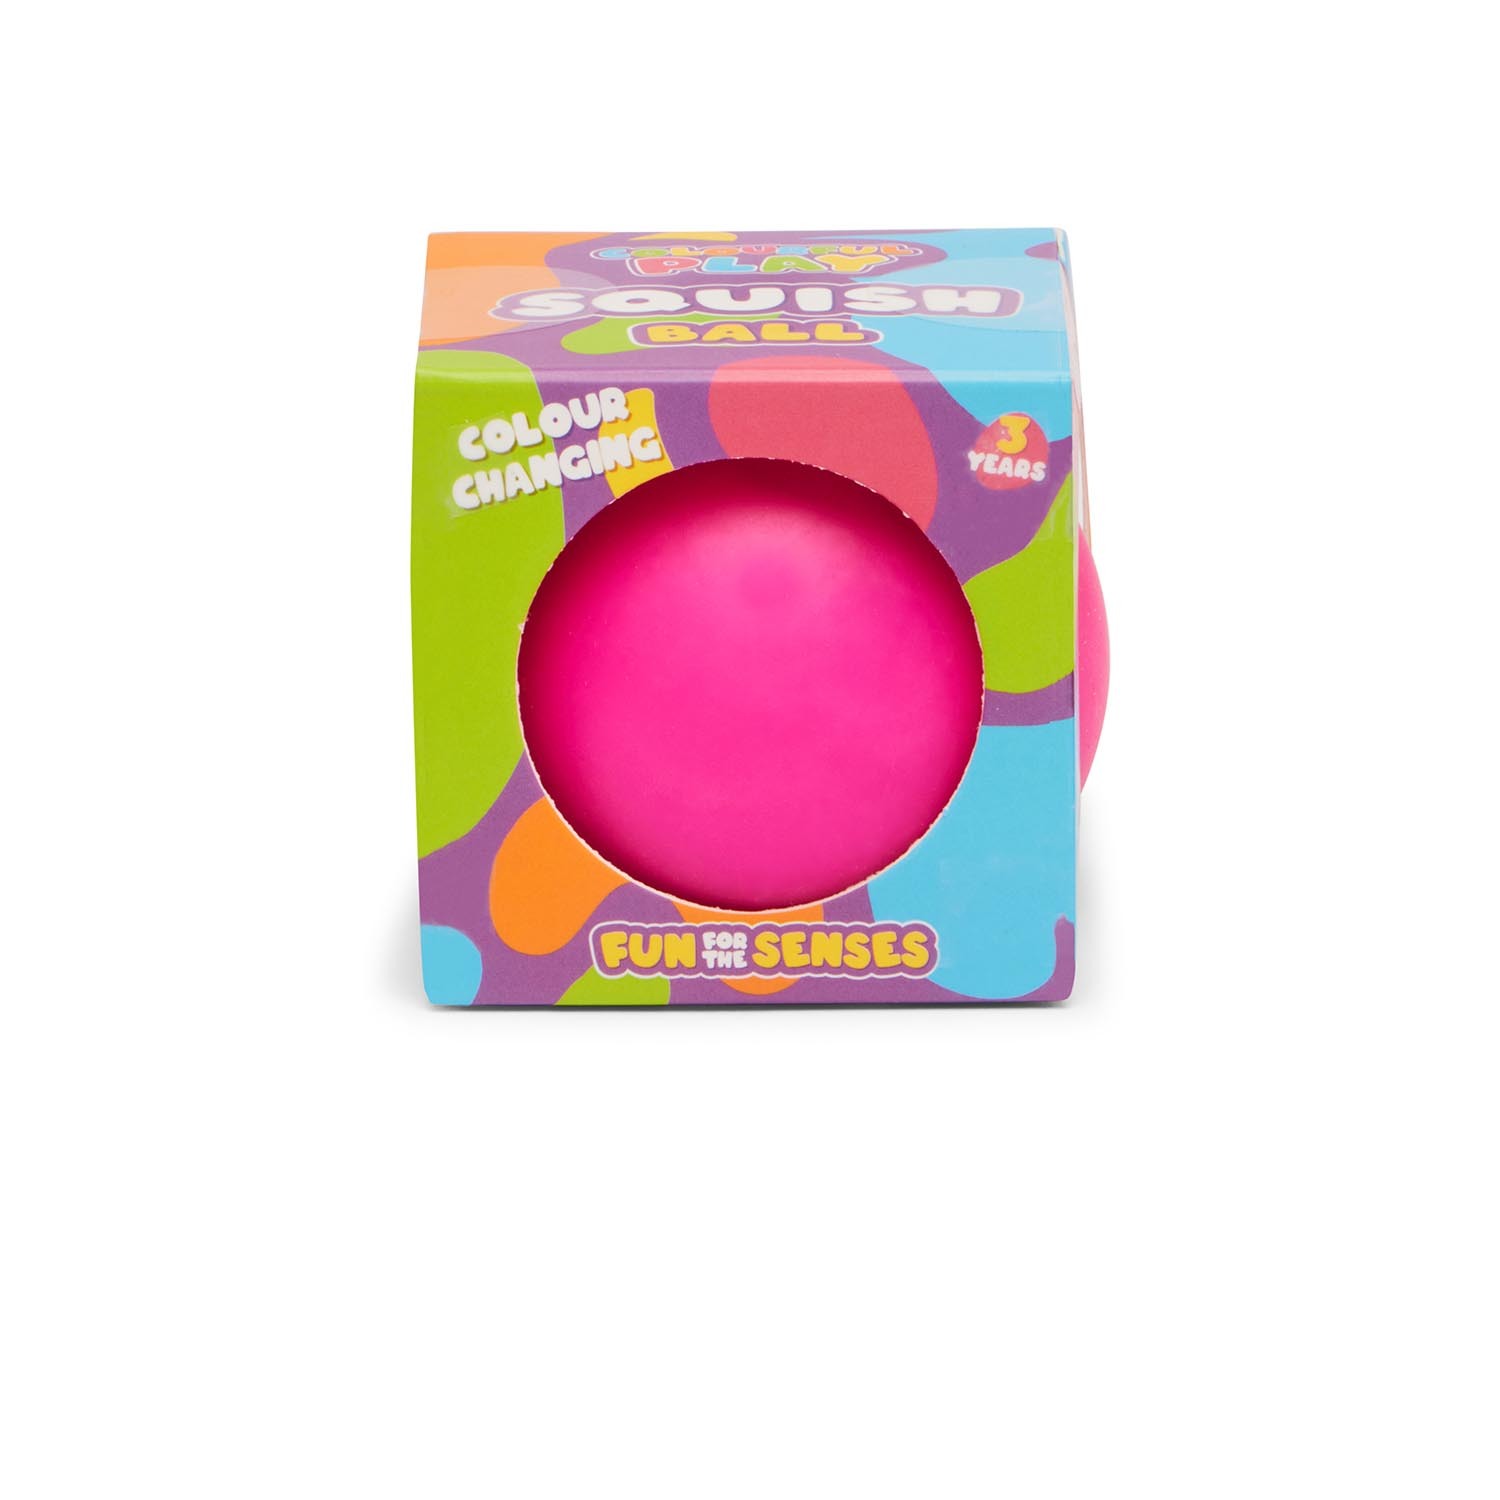 Single ToyMania Colour Changing Sensory Squish Ball in Assorted styles Image 5